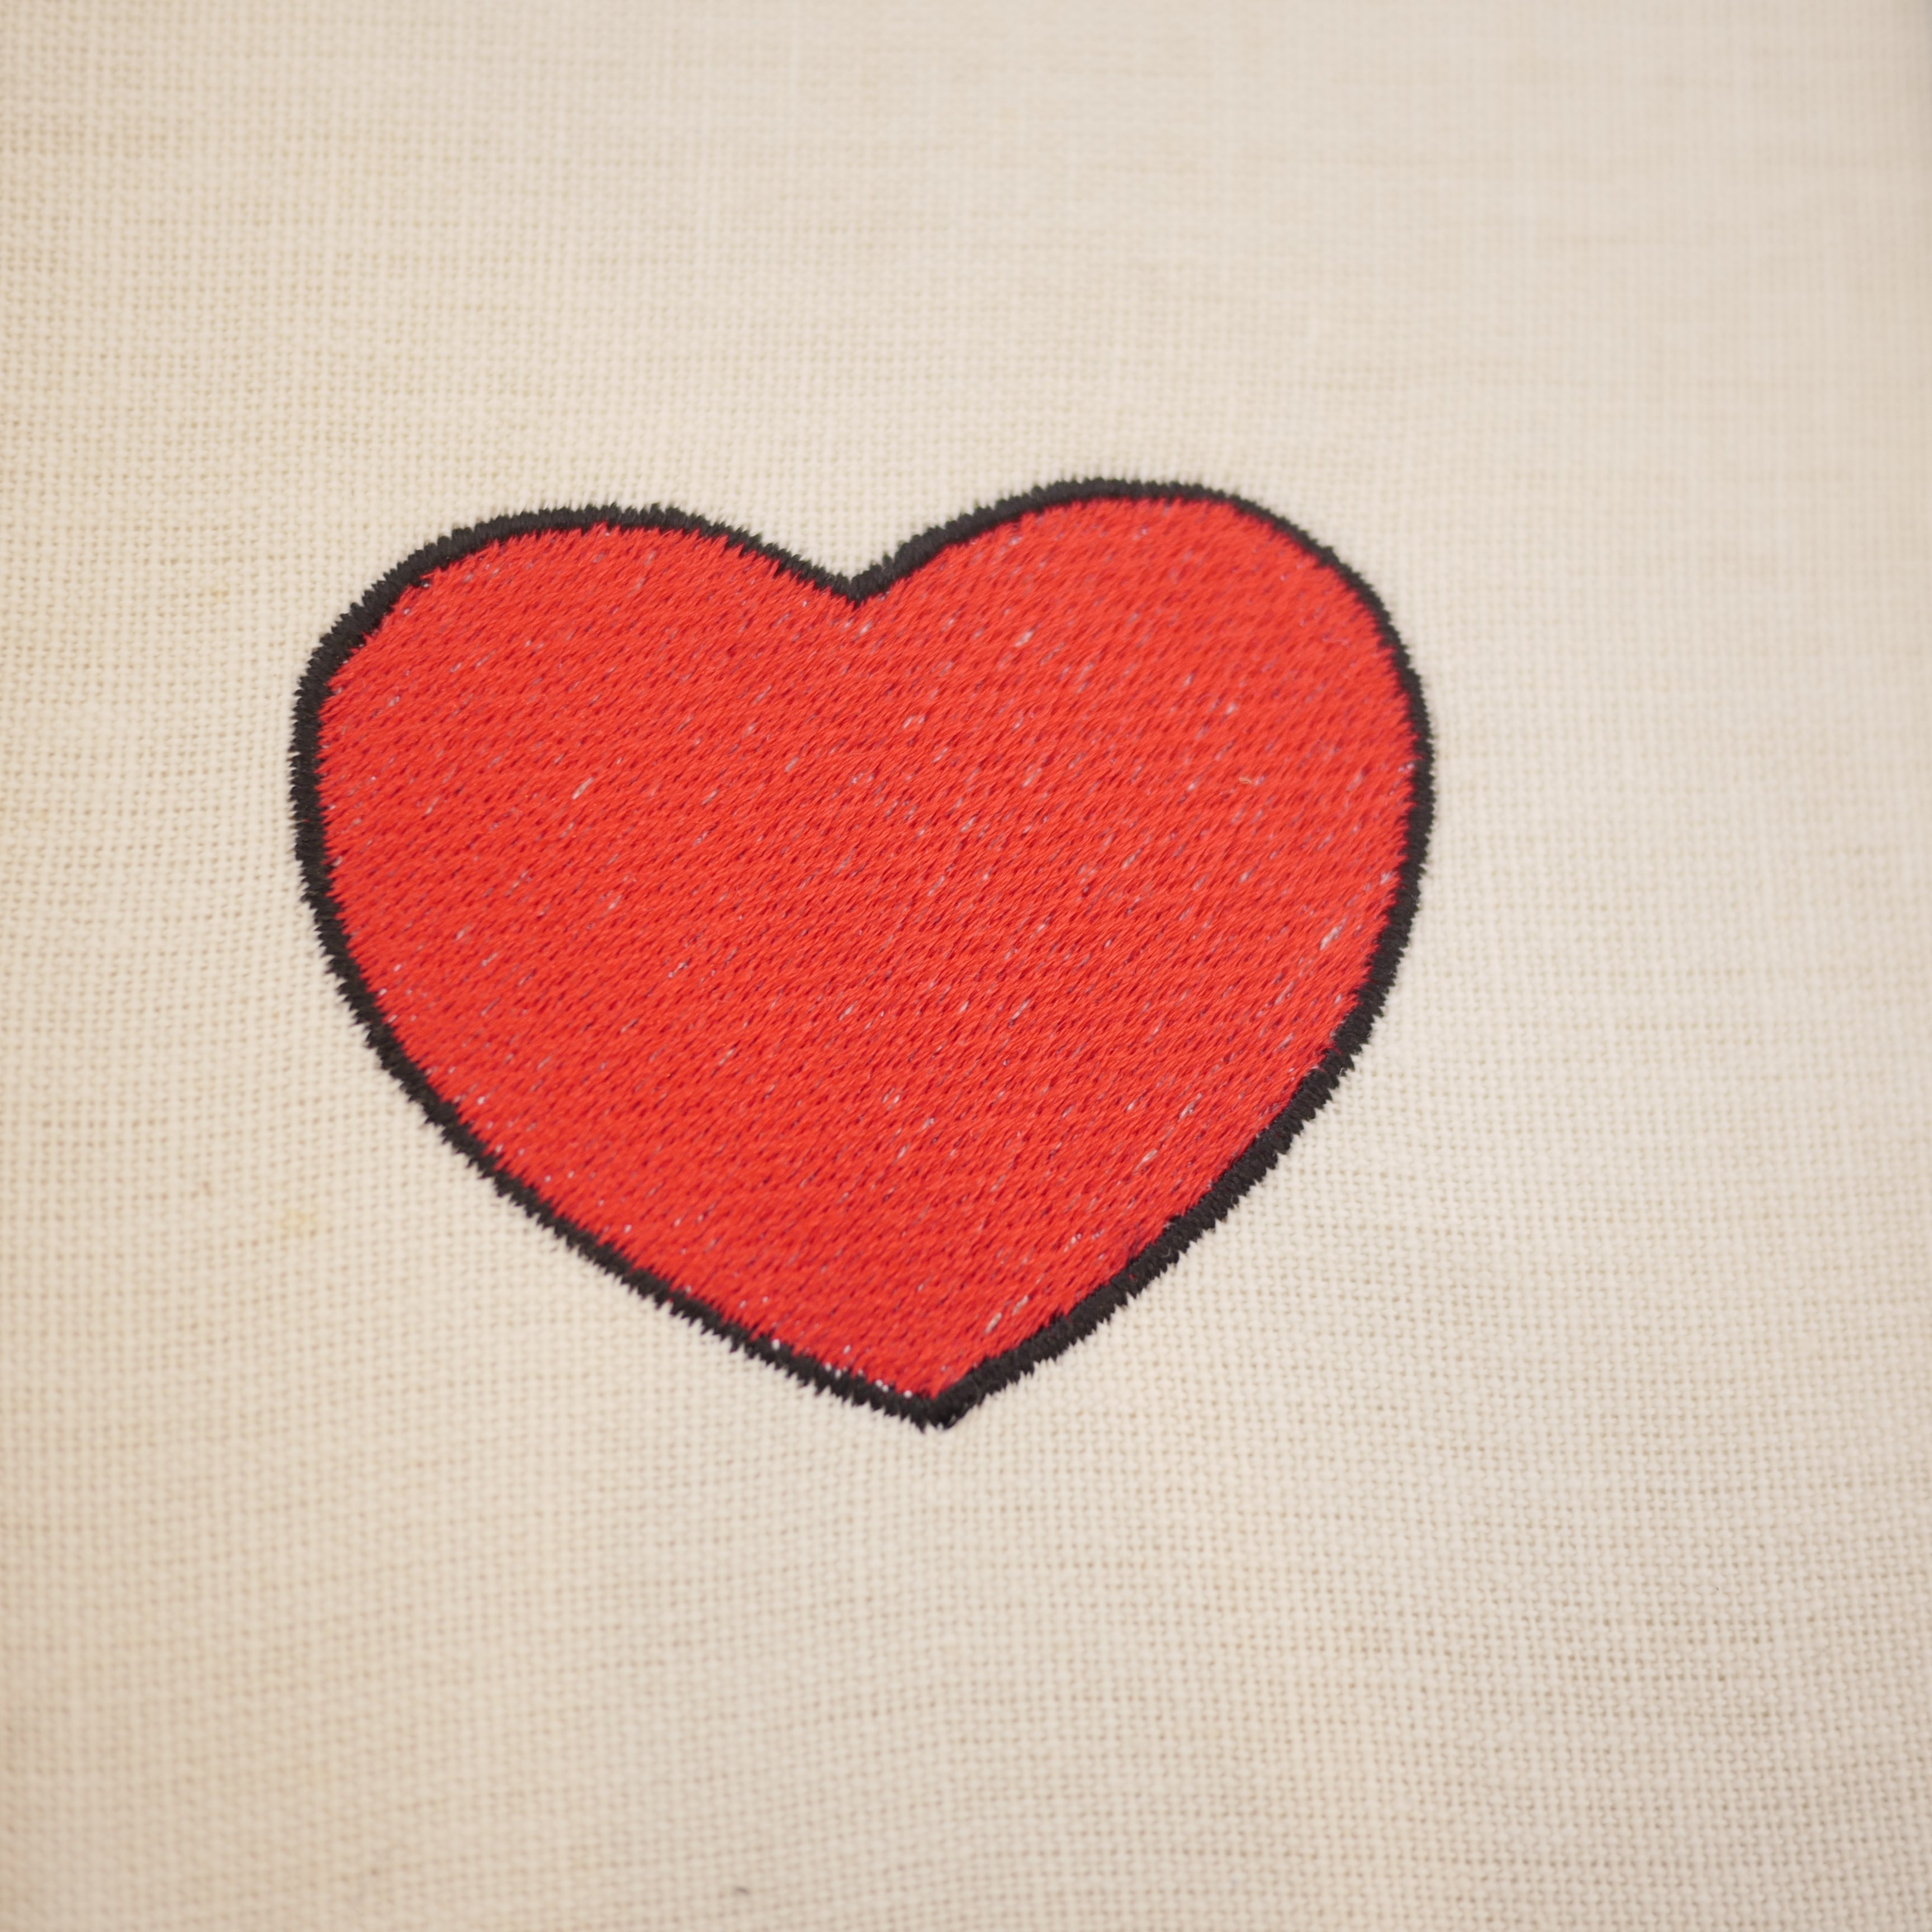 Heart Embroidery Design